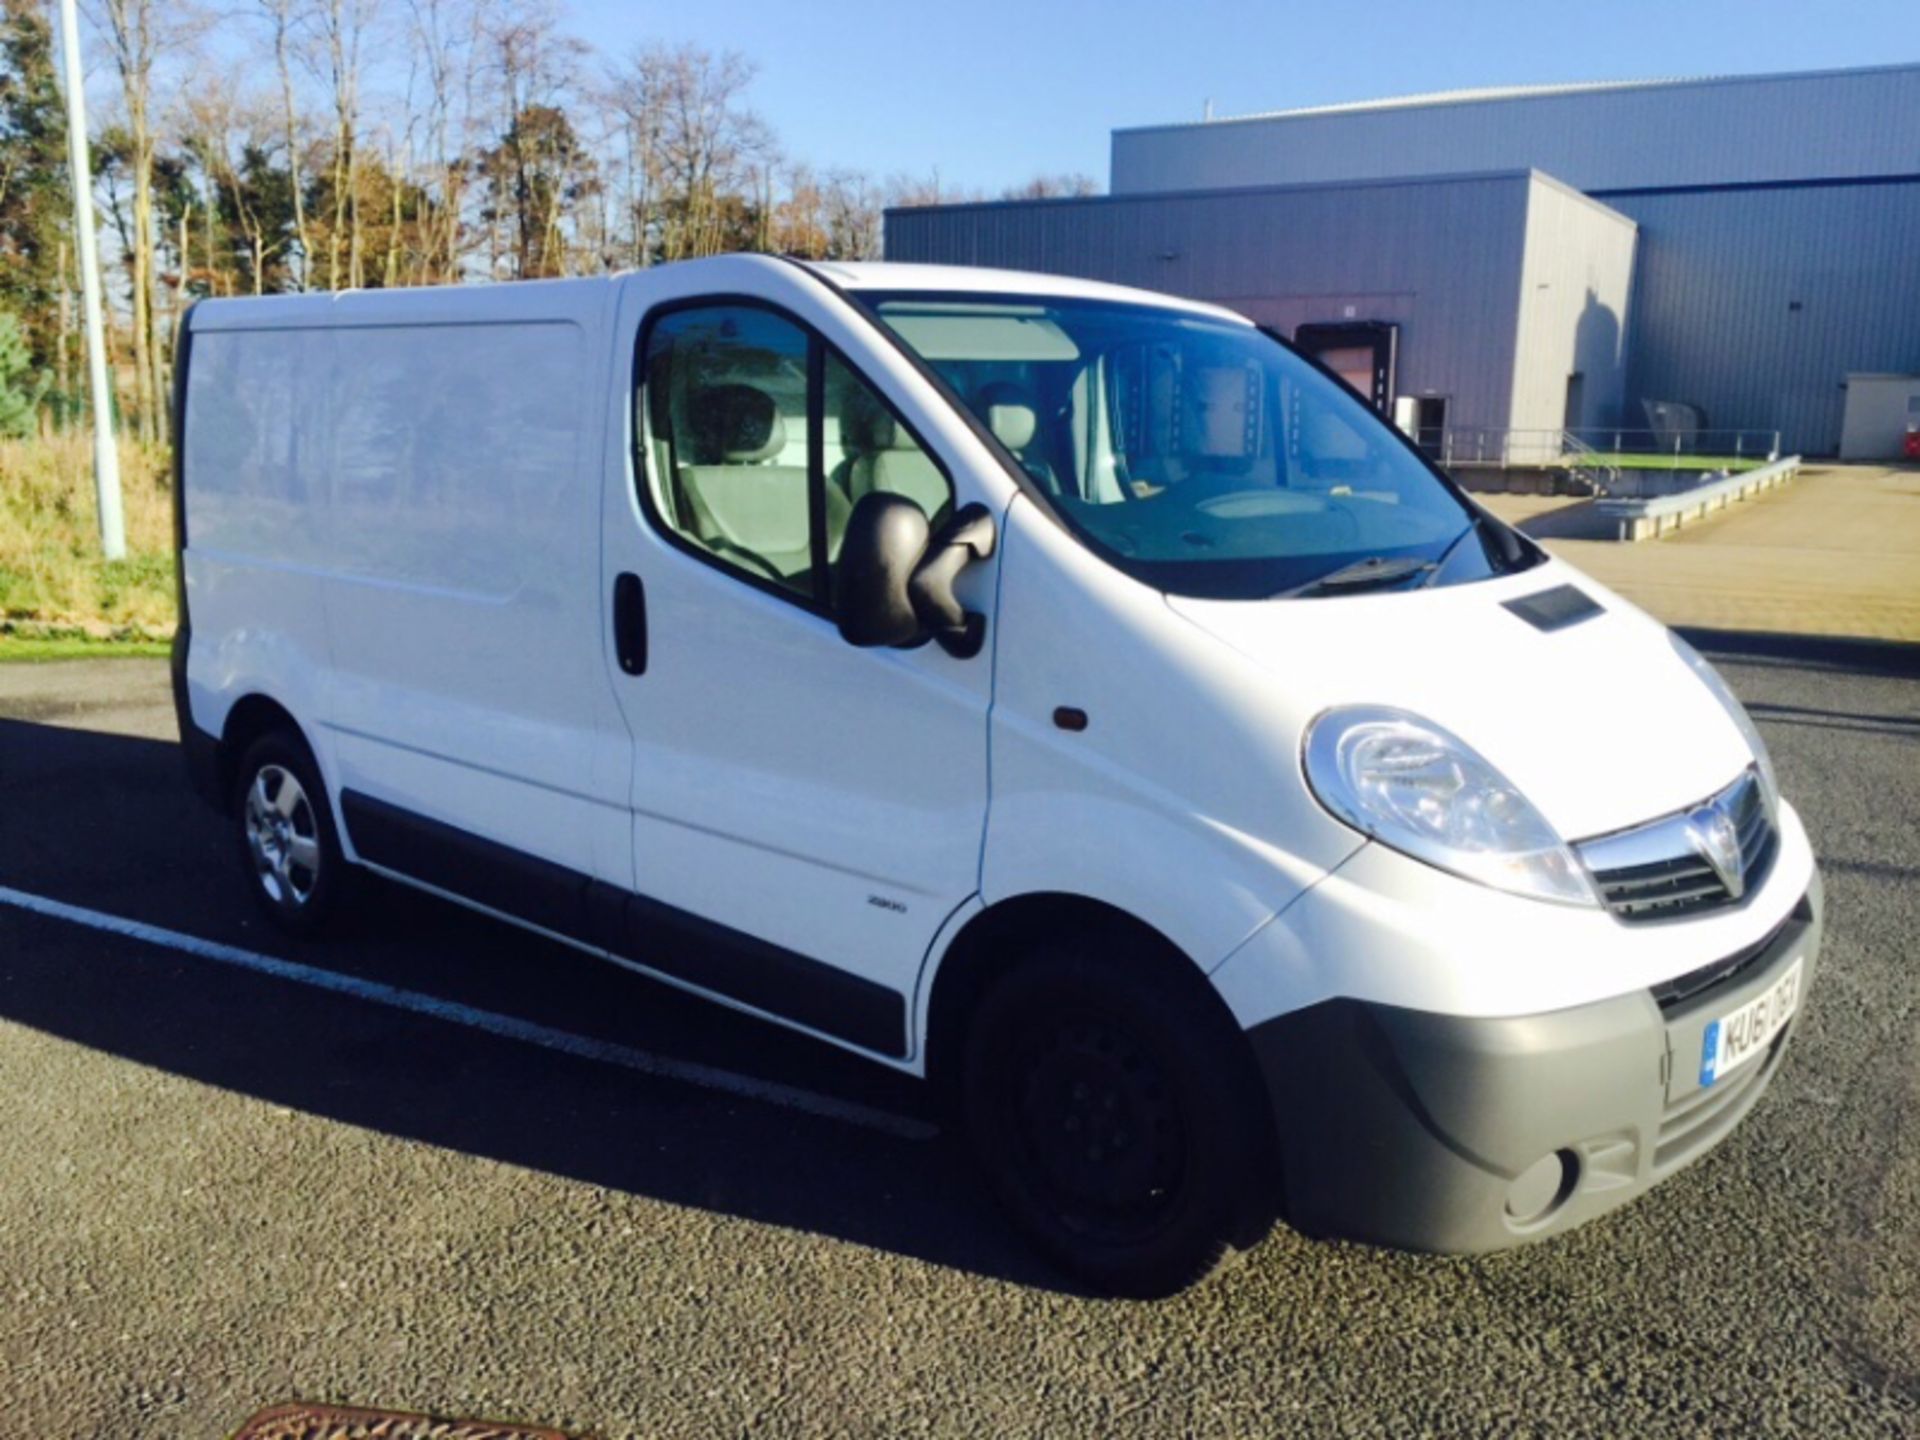 VAUXHALL VIVARO 2.0CDTI - 2012 MODEL - ELECTRIC PACK - 1 OWNER FROM NEW - FULL SERVICE HISTORY!!!!